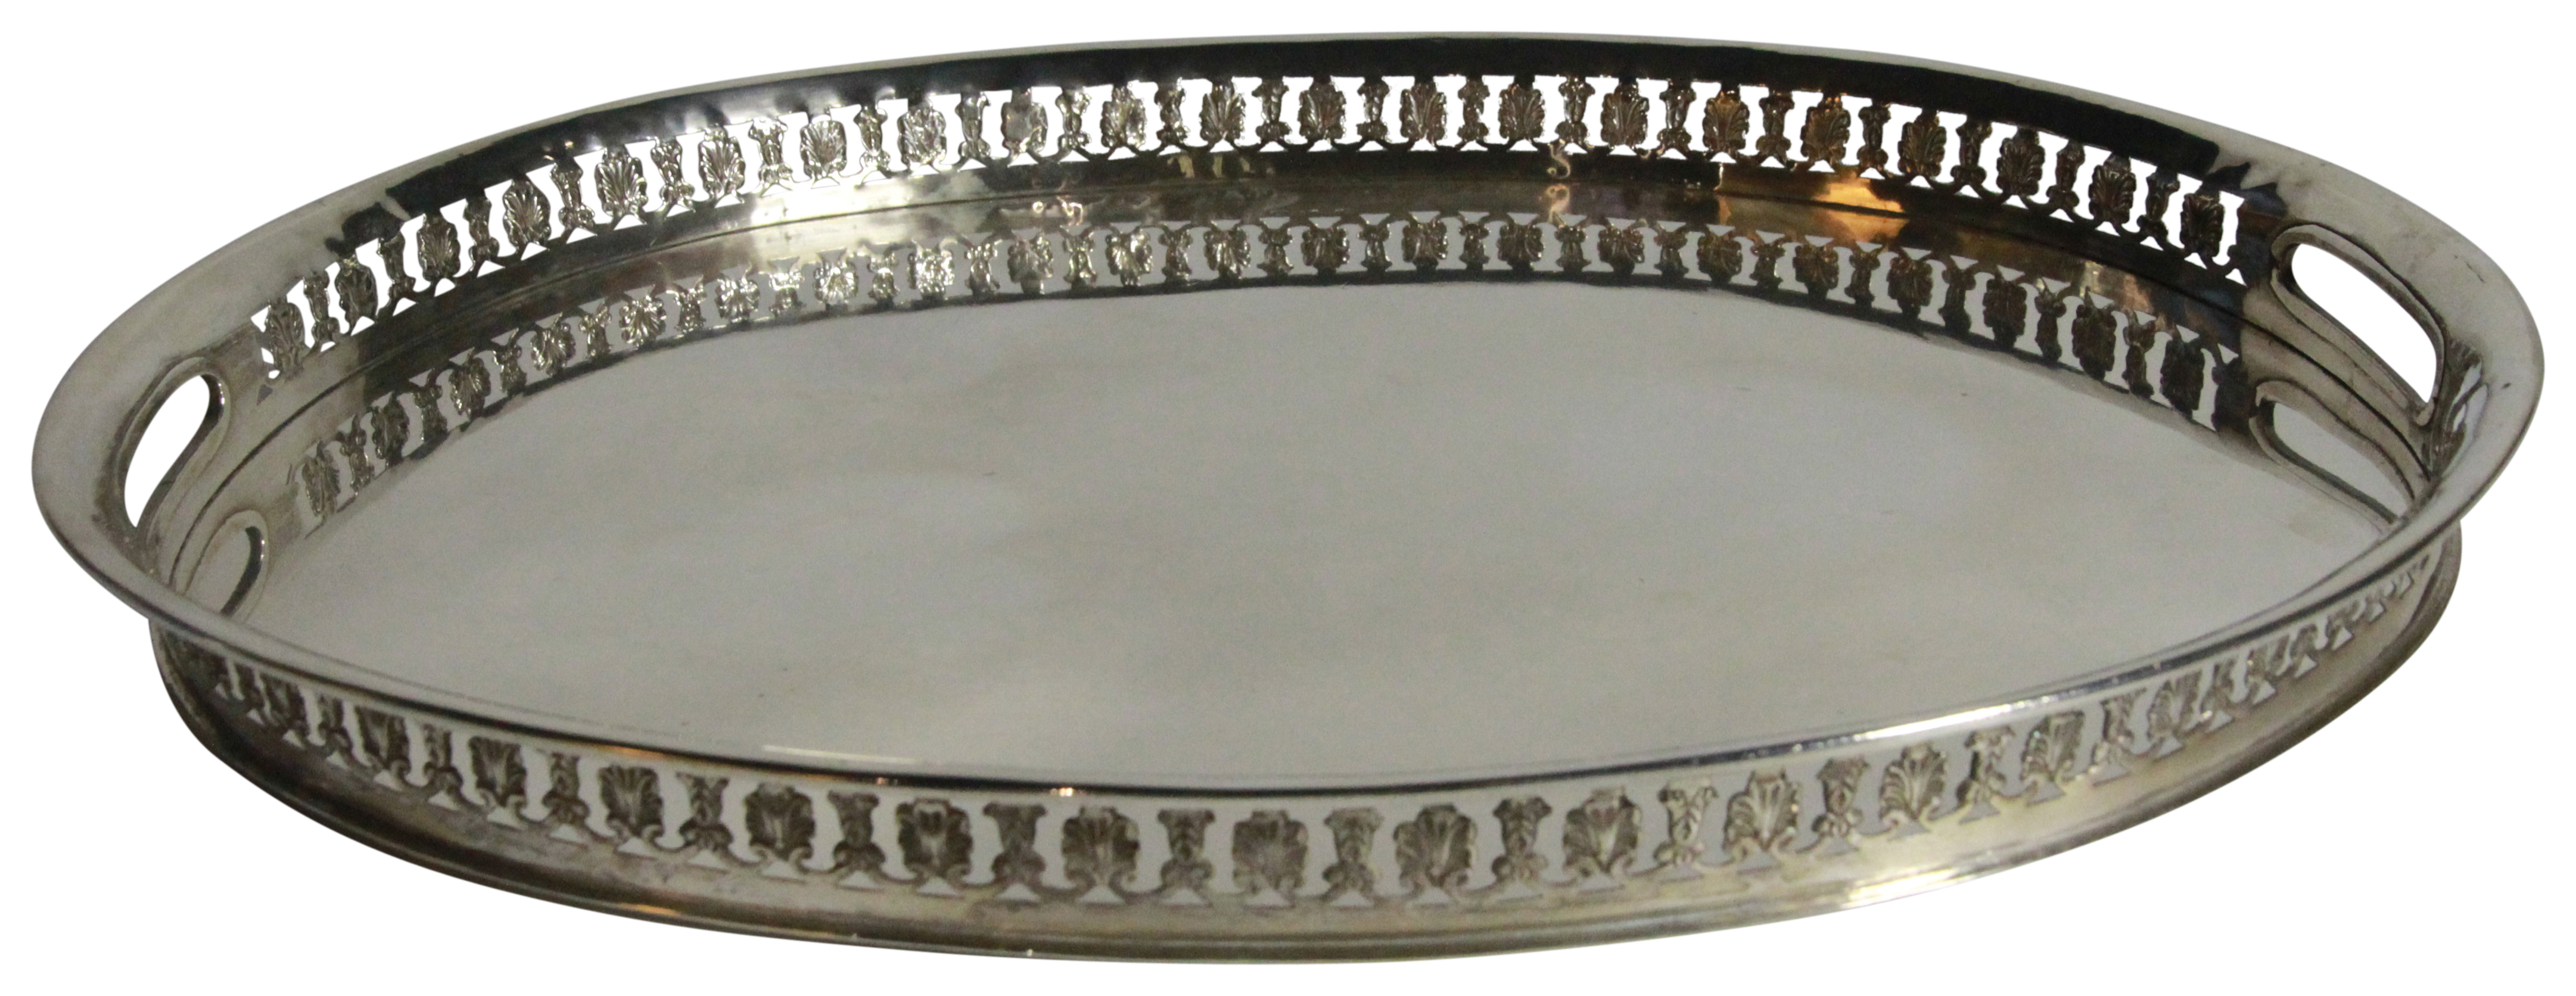 A large Russian silver oval tray. With pierced side decorations. Circa 1840 - (1005 grams) ( - Image 2 of 3